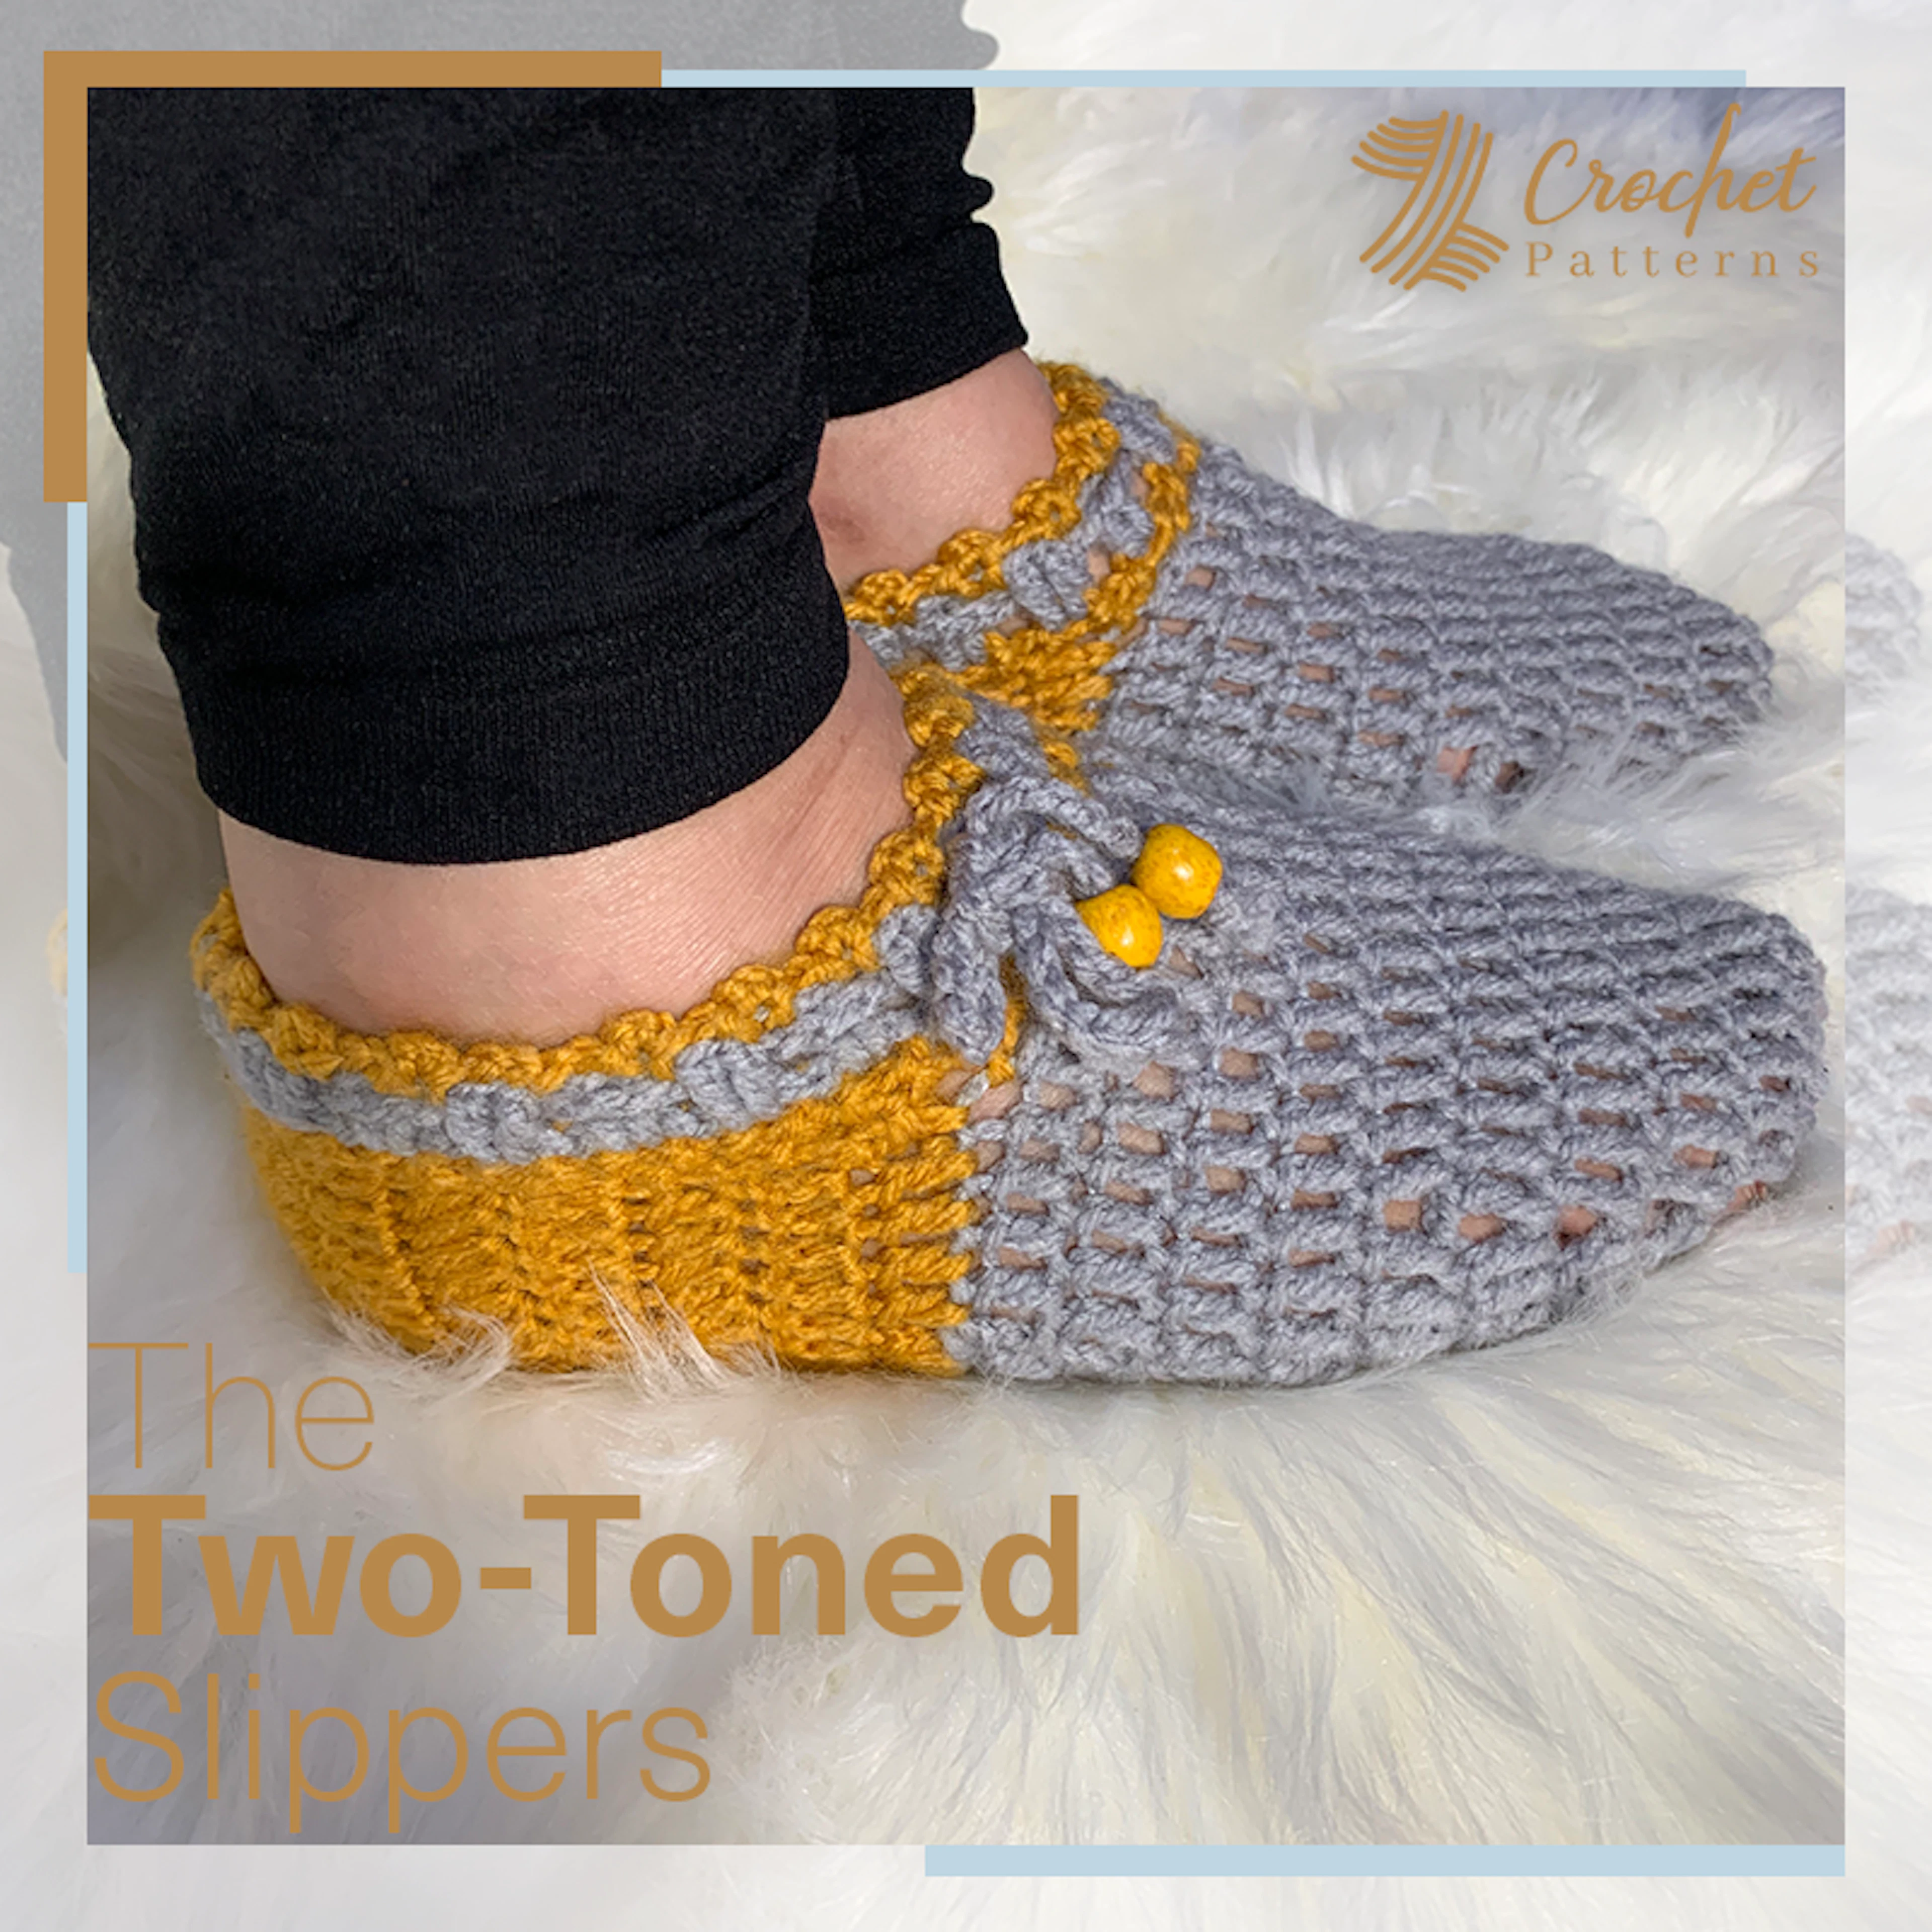 CROCHET TOW-TONED SLIPPERS PATTERN CHART